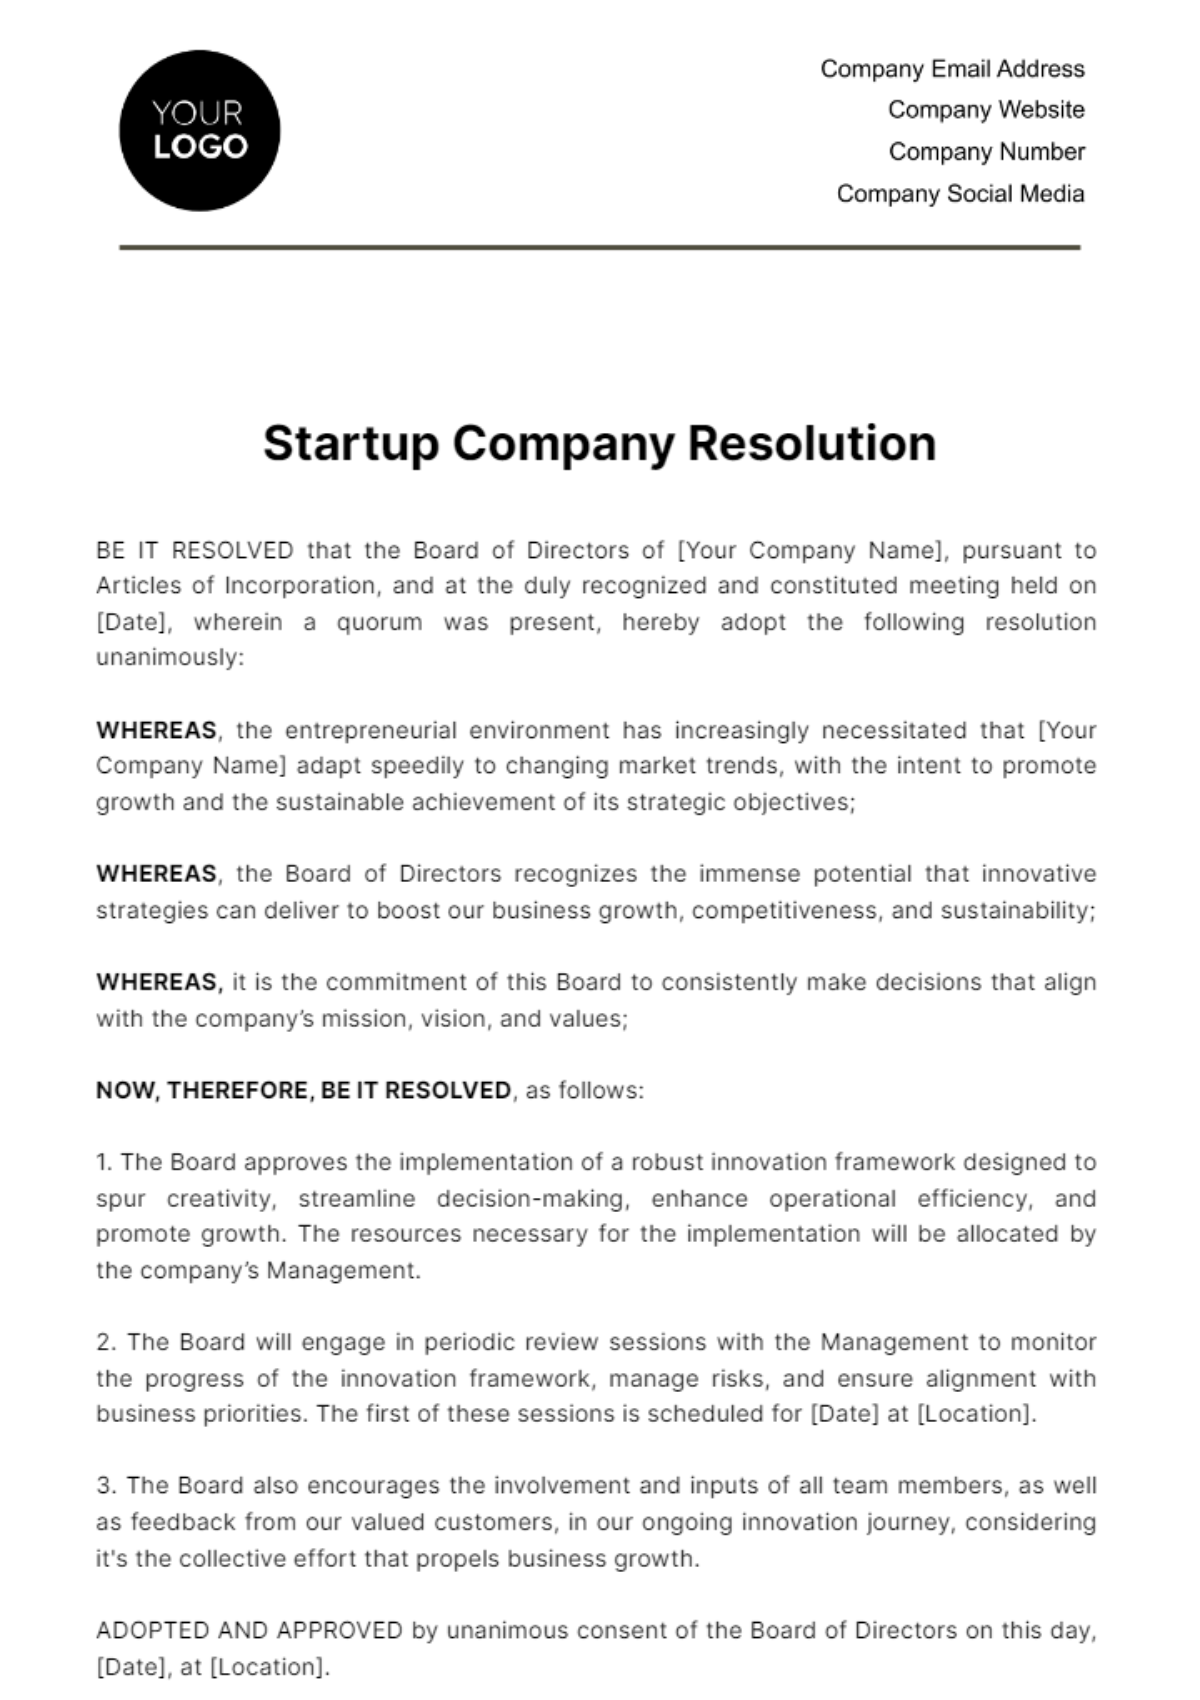 Free Startup Company Resolution Template